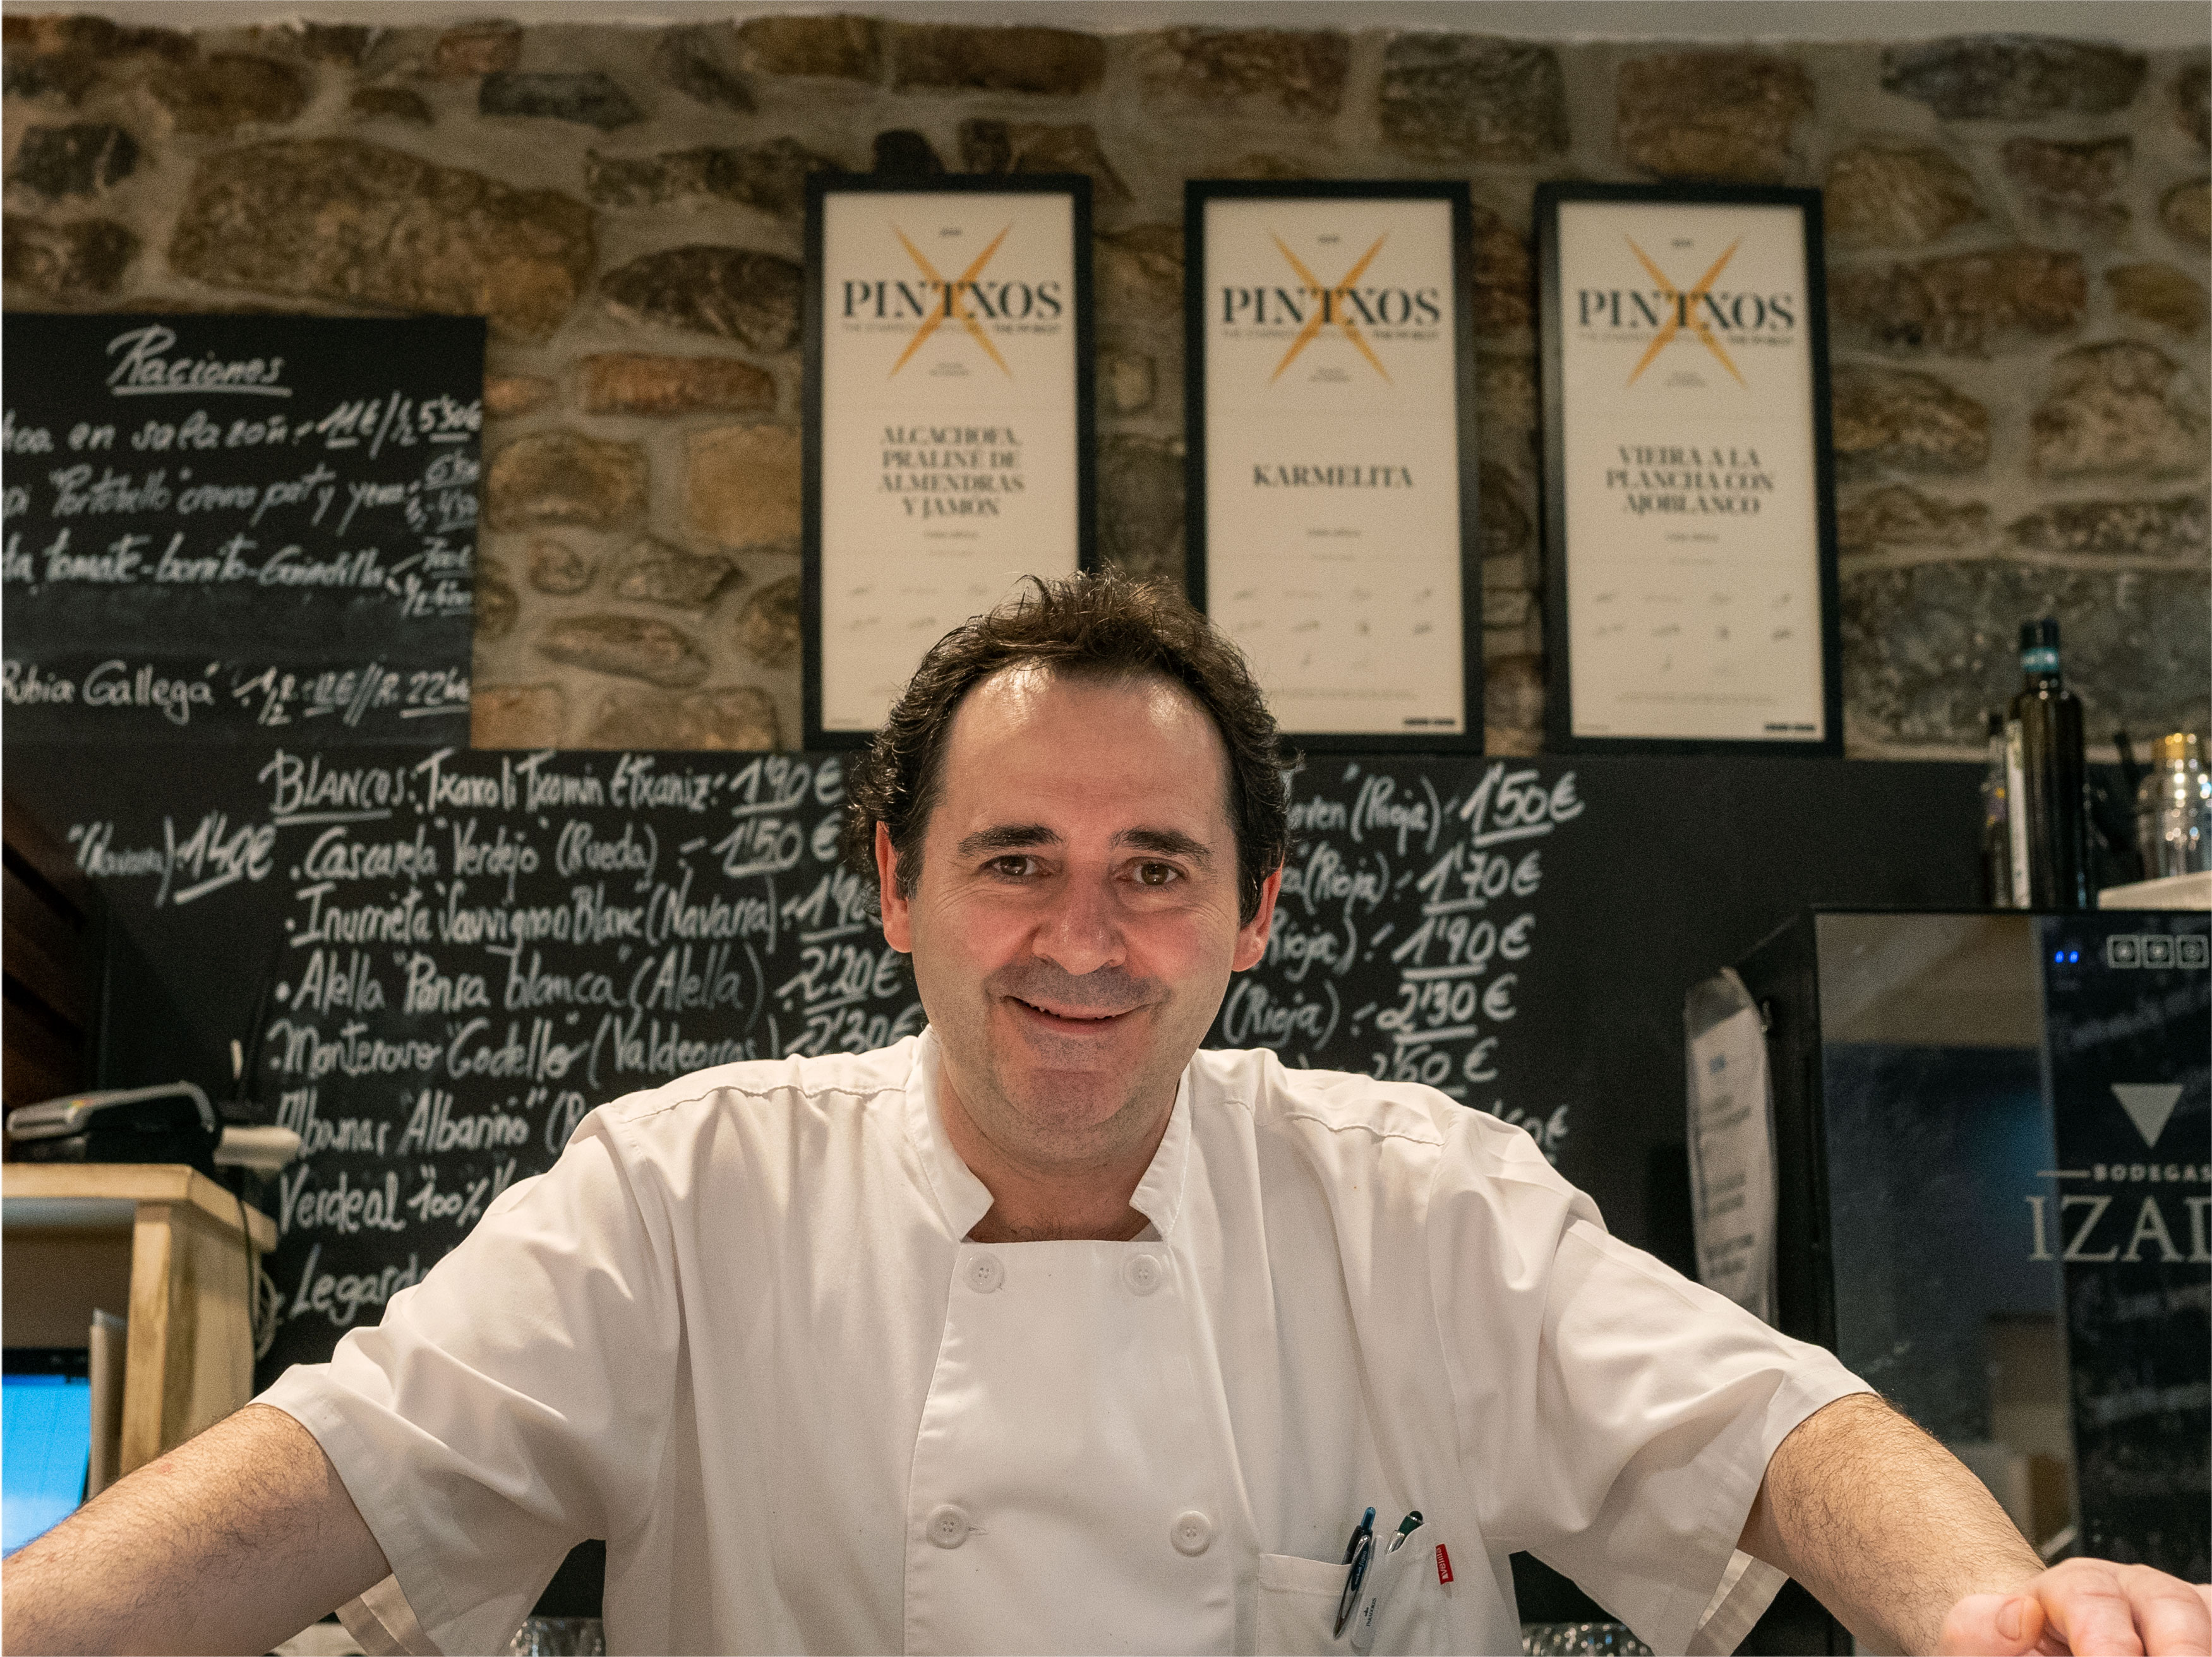 Pablo Loureiro: “We must transmit our philosophy to visitors, our way of understanding pintxos”